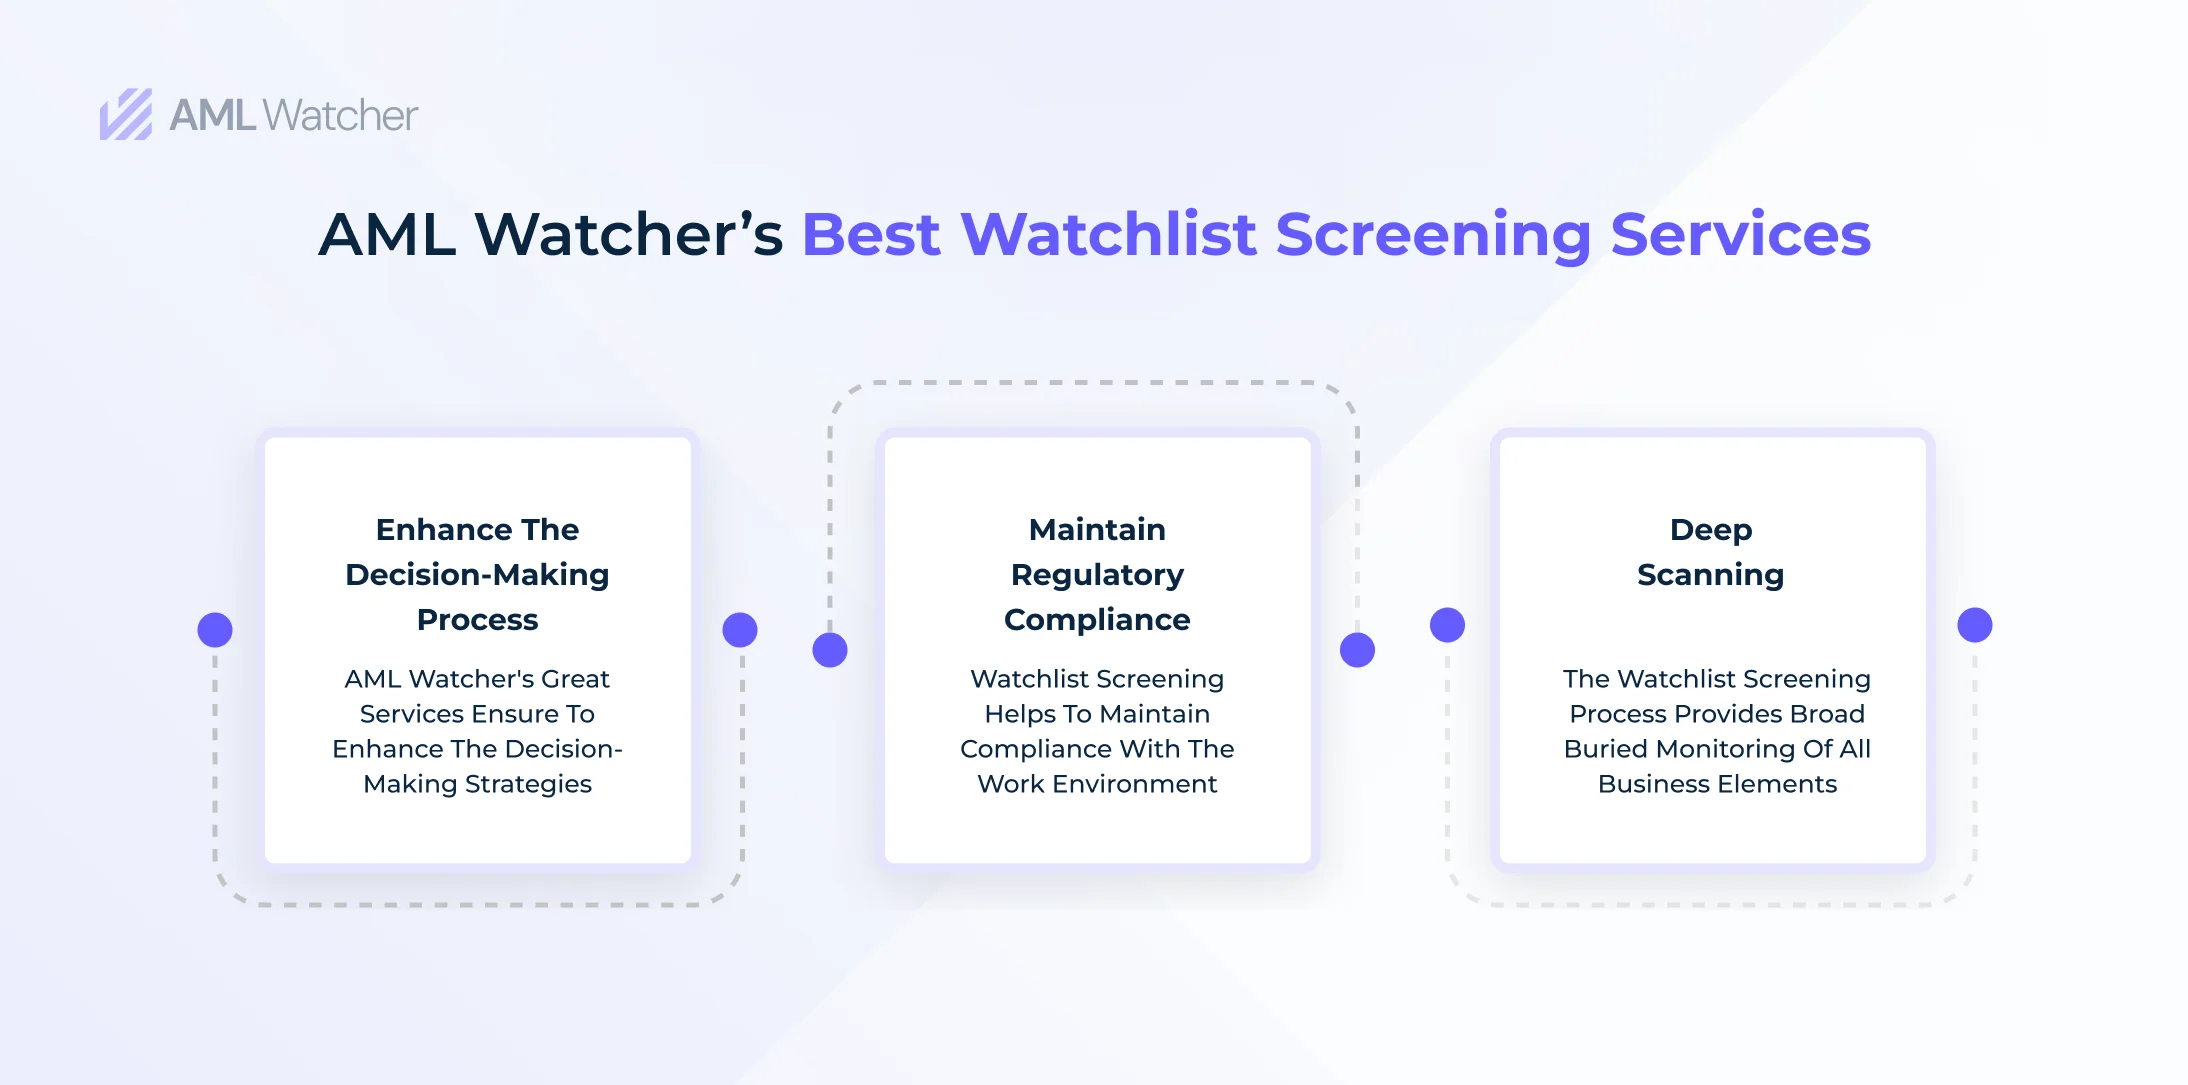 AML Watcher’s Watchlist screening services are one of the best ways to deal with challenges.